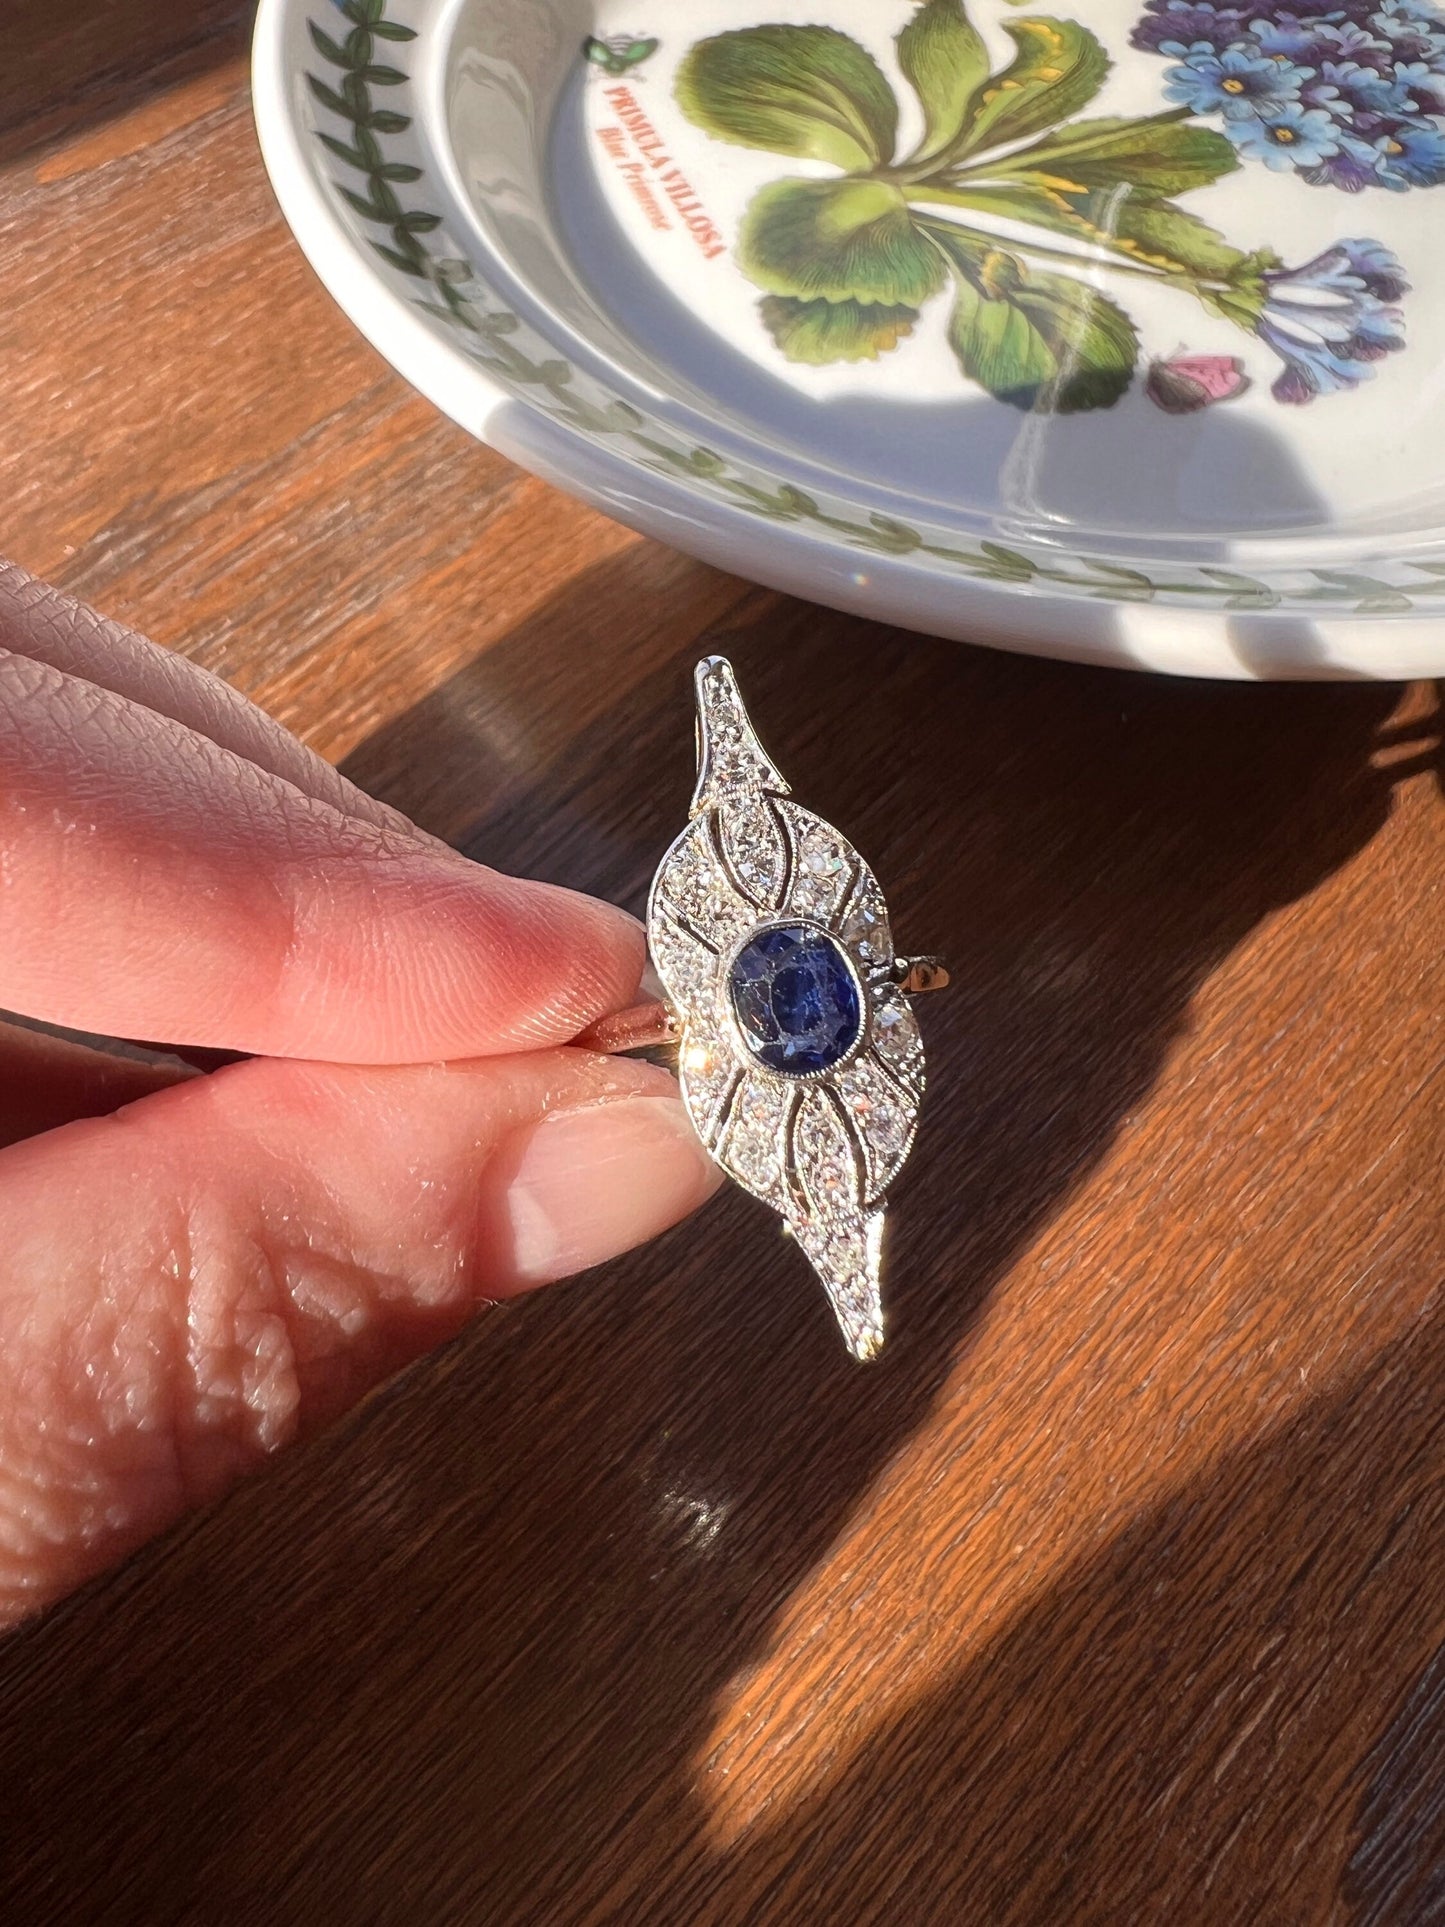 LARGE Antique SAPPHIRE 20 Old Mine Rose Cut DIAMONDS 18k White Gold Statement Ring SWiRL Unique Gift Belle Epoque Dramatic Cocktail 1.25Inch